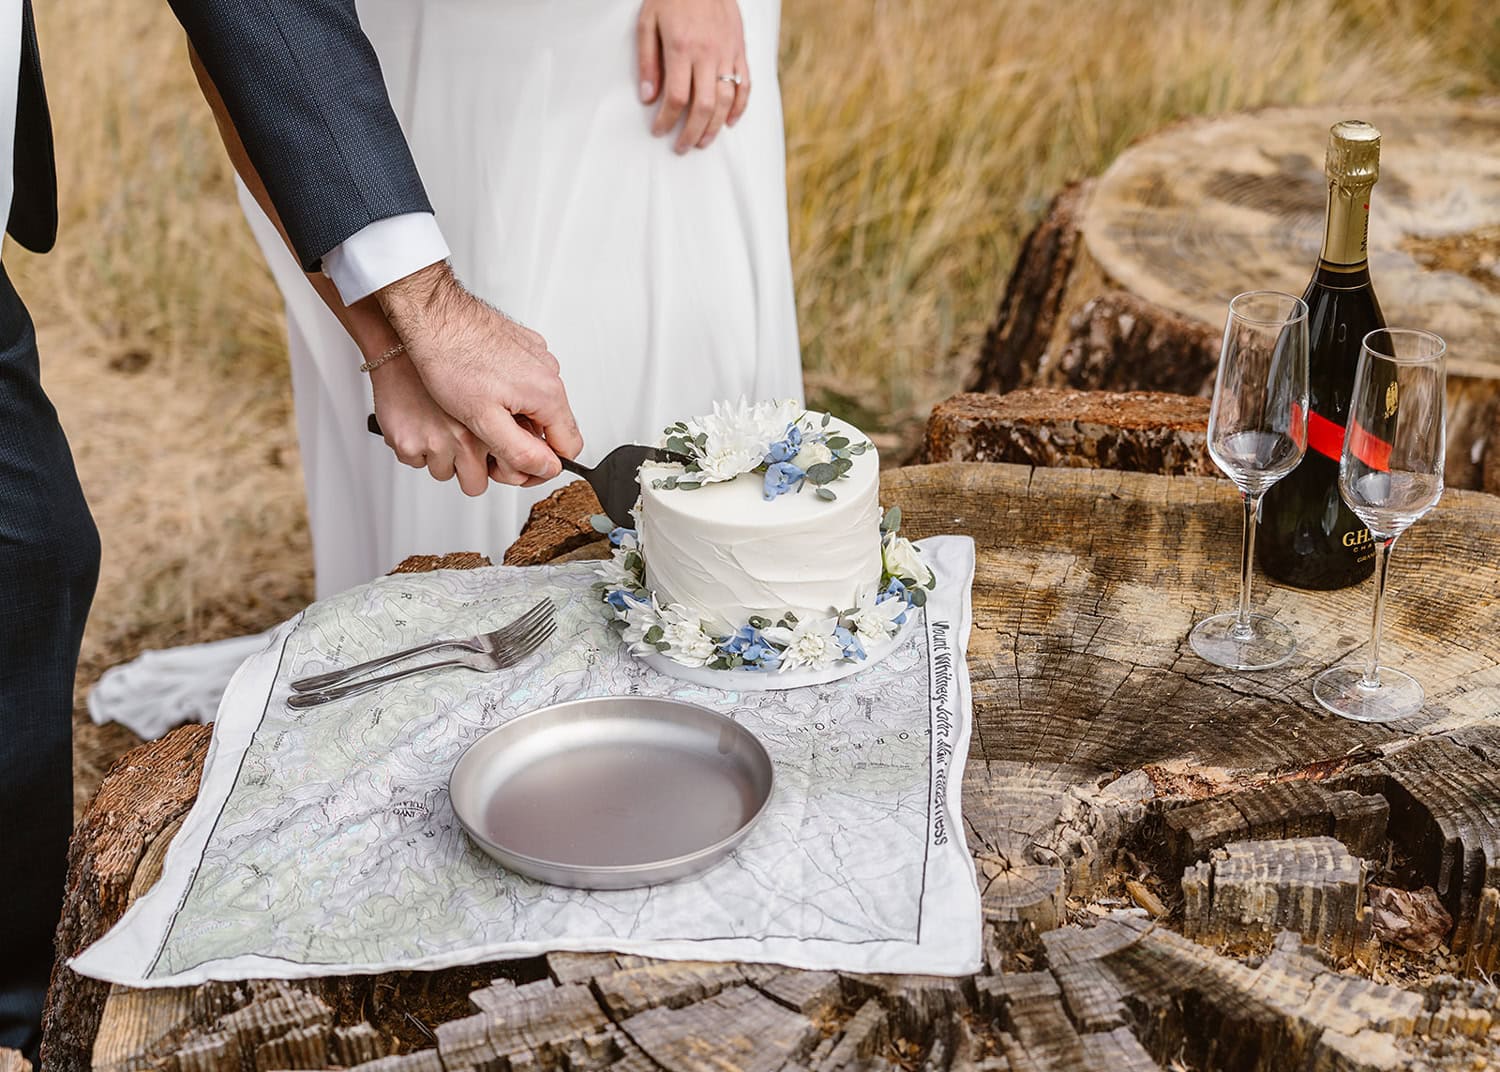 Bride and groom cutting cake at their Yosemite elopement.